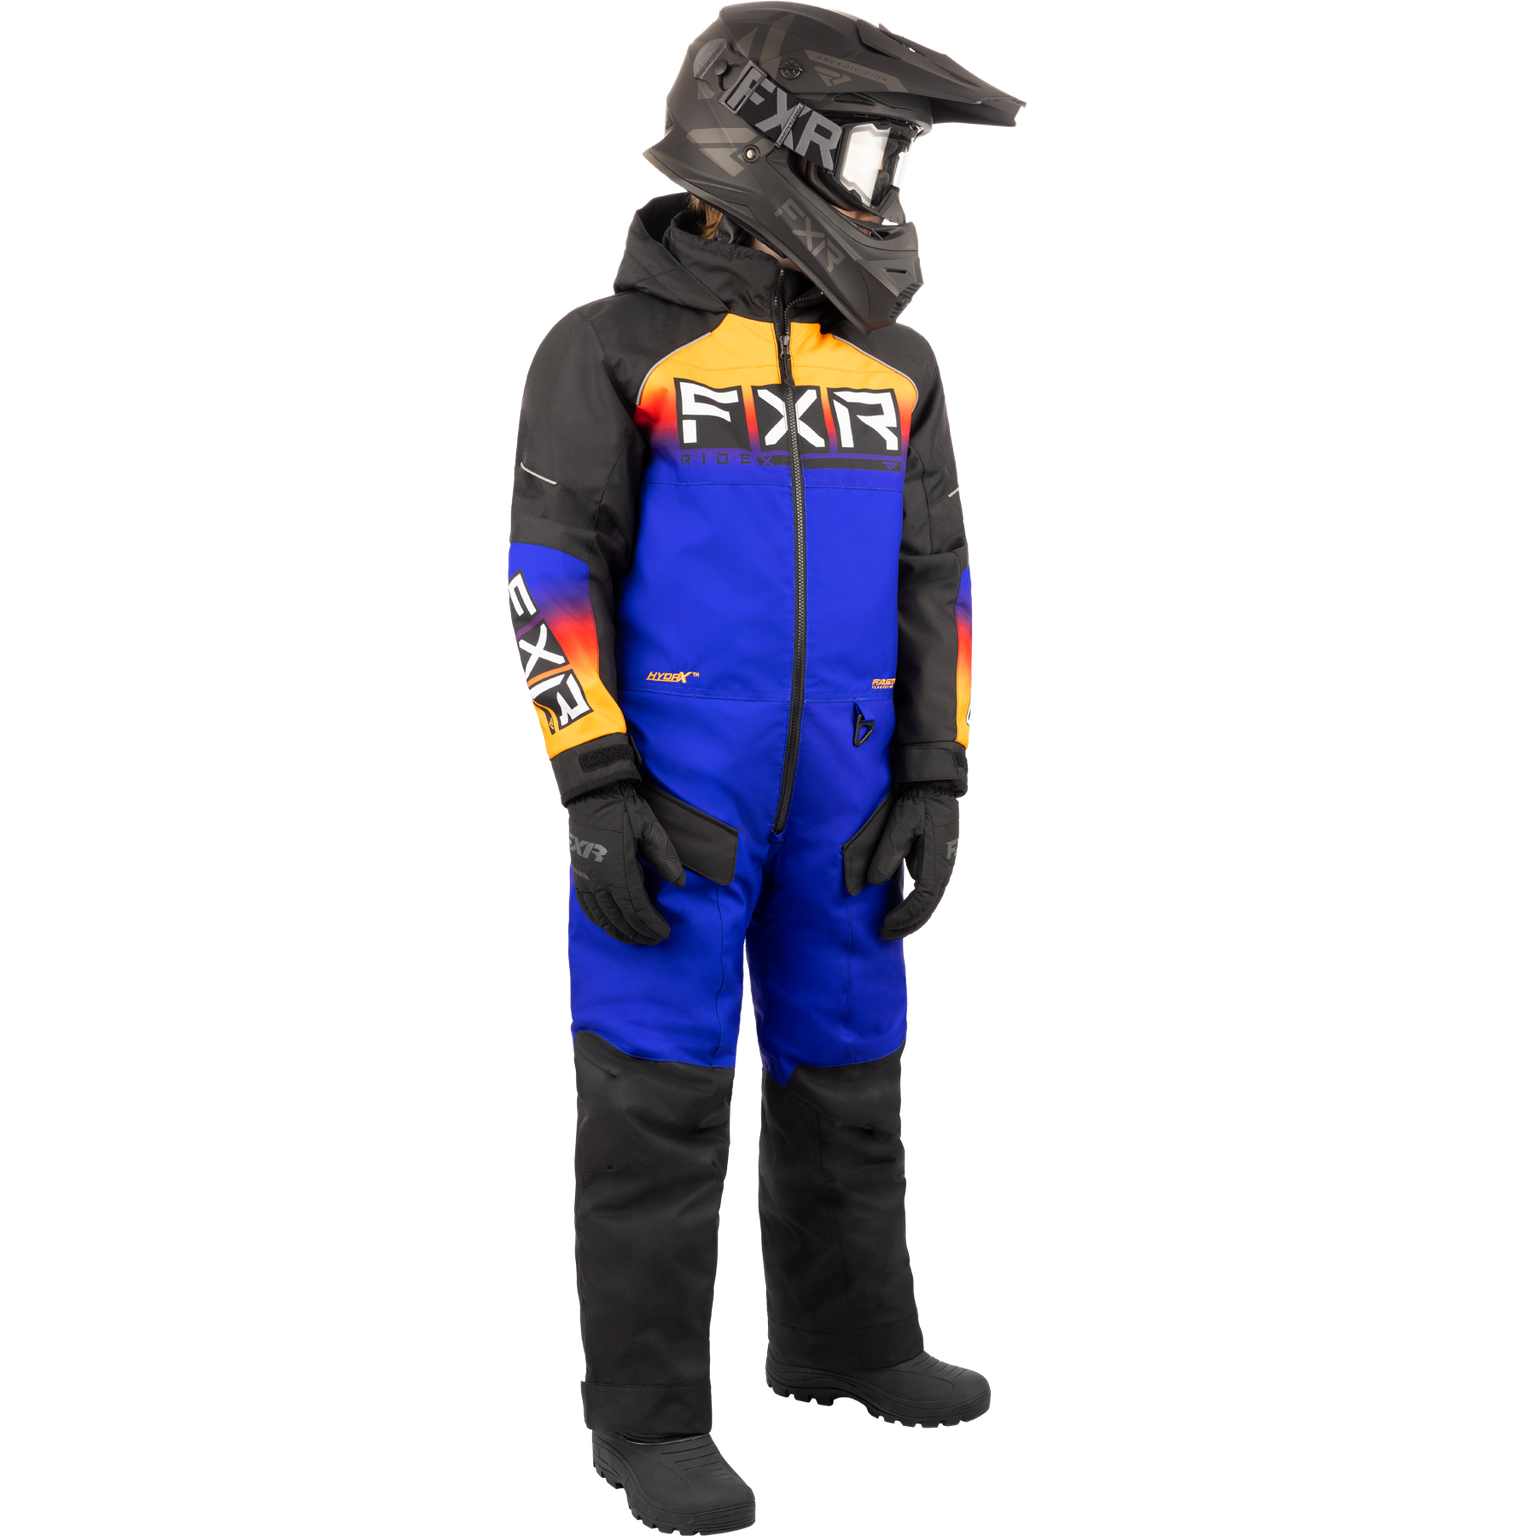 Onepiece FXR Child/Youth Recruit, Black/Anodized